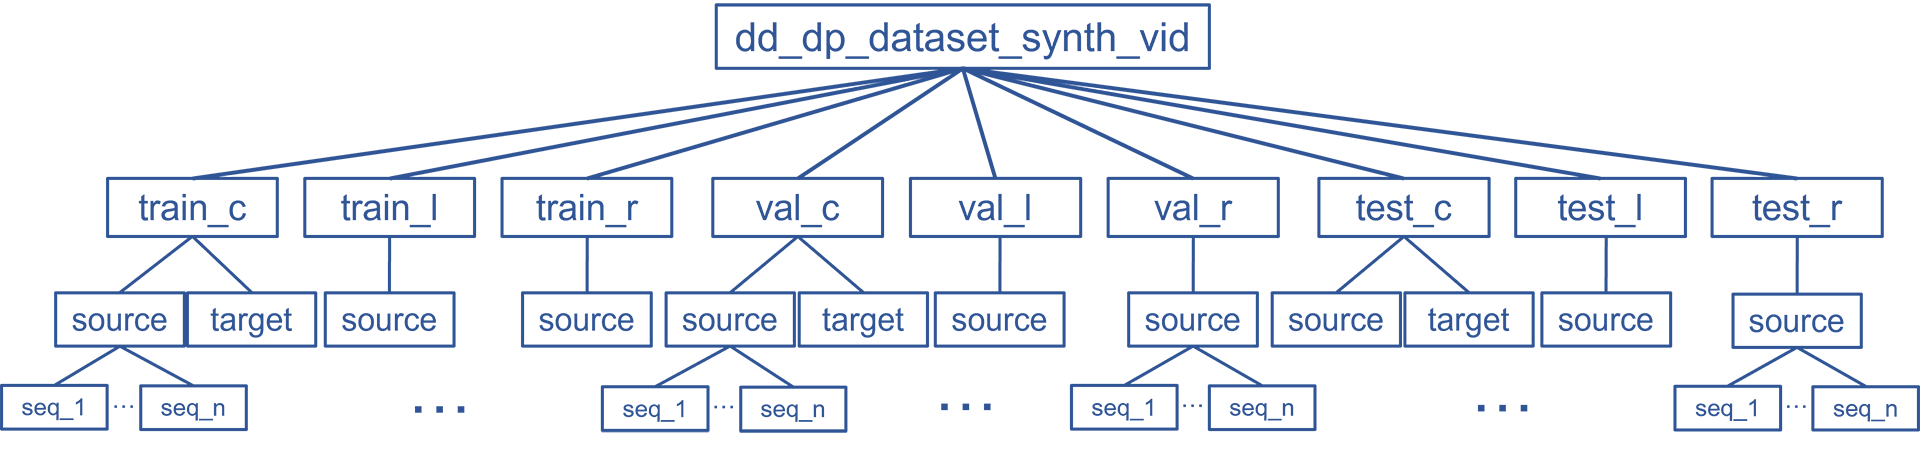 synthetic dataset structure